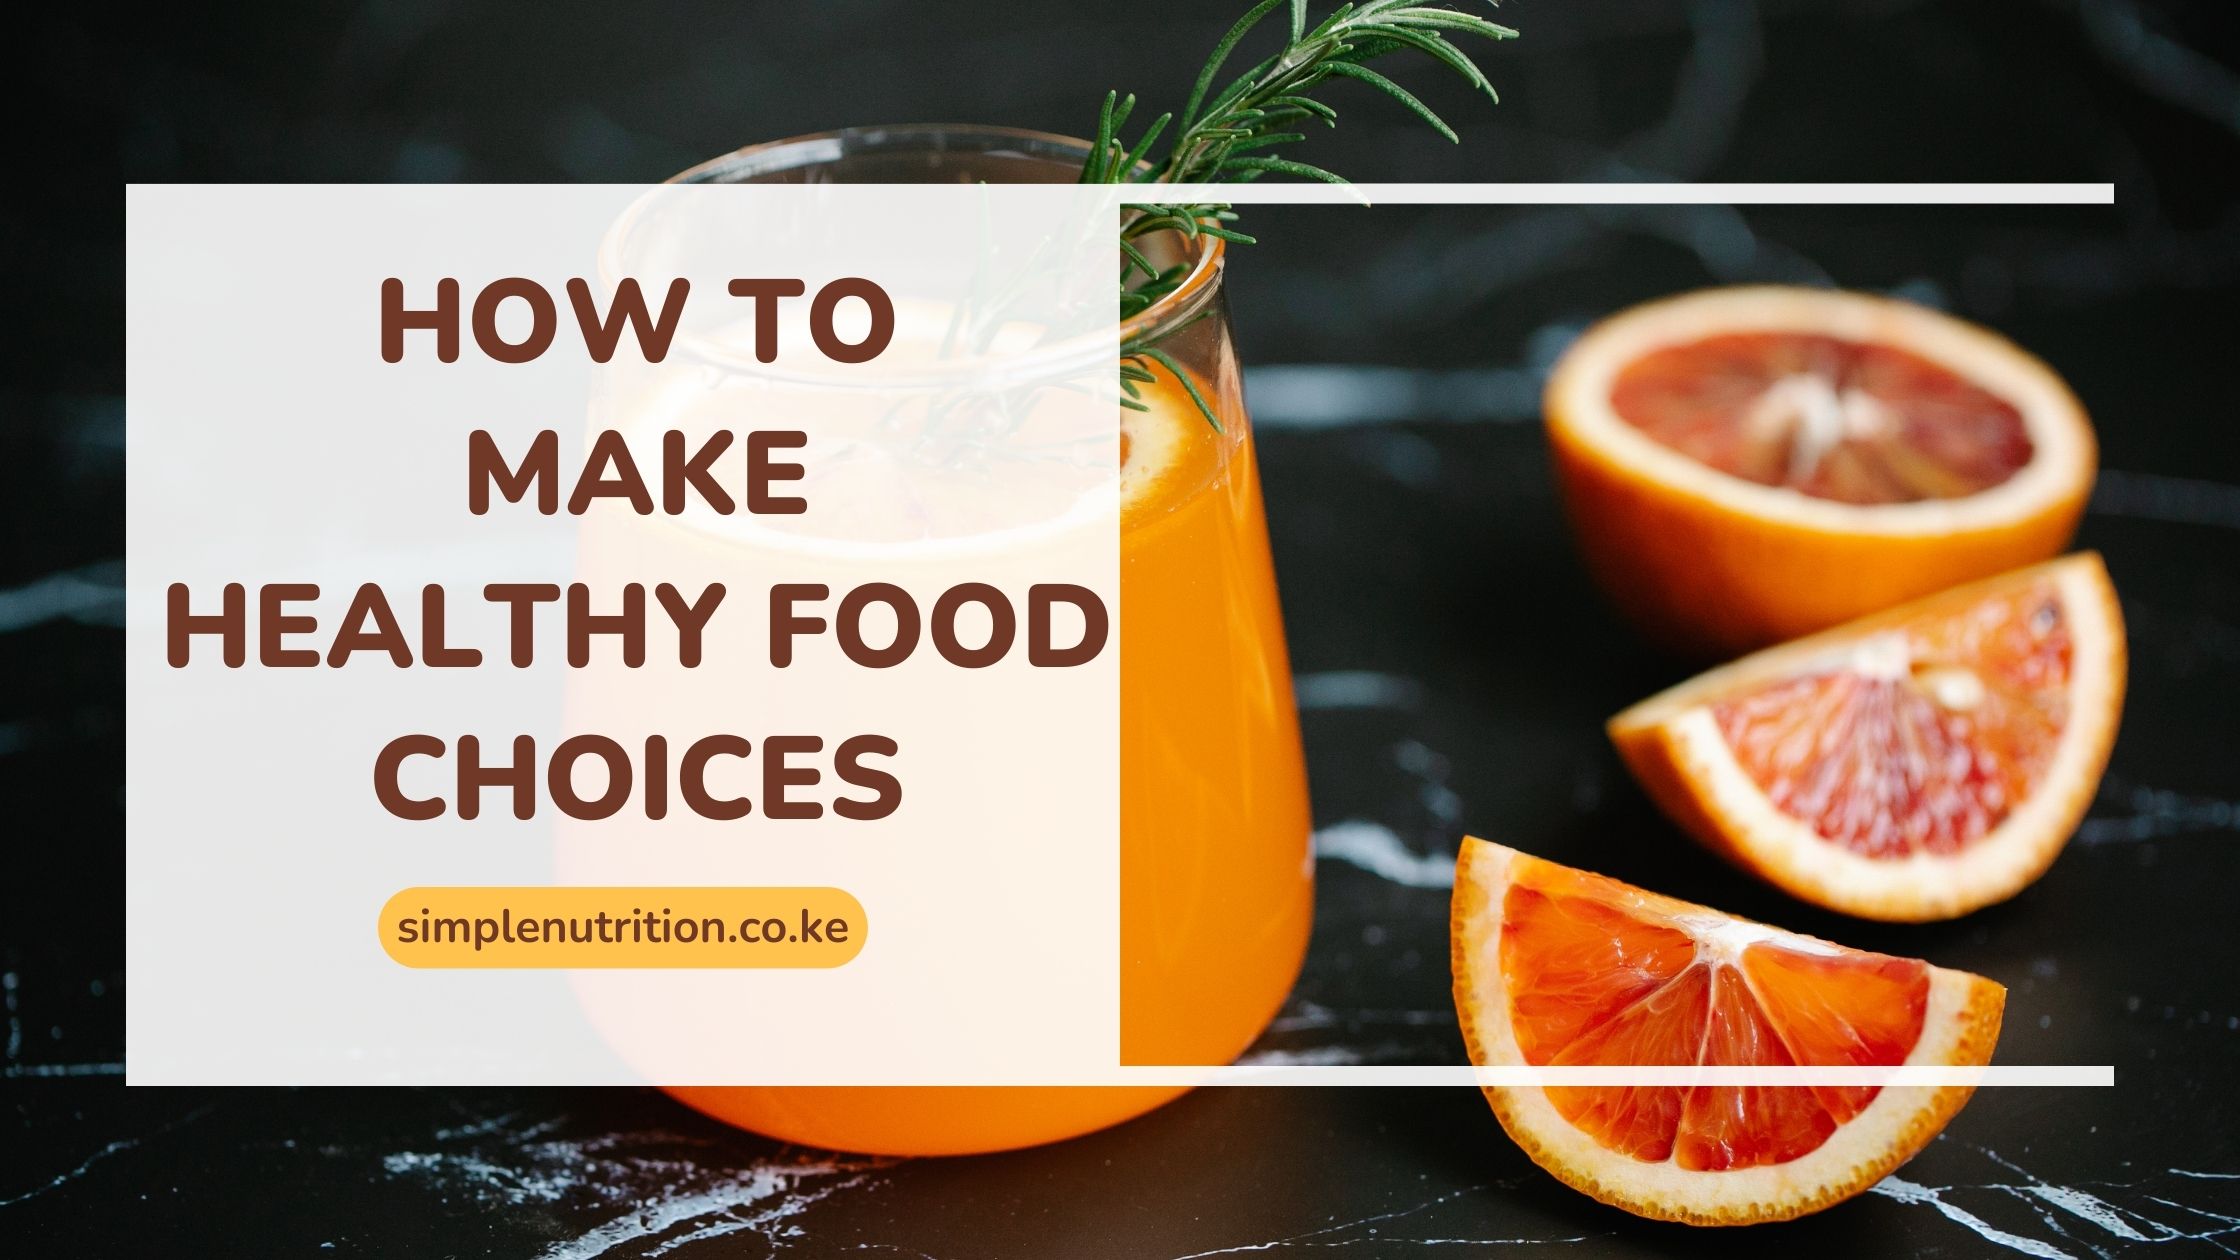 How to Make Healthy Food Choices in Your Daily Life